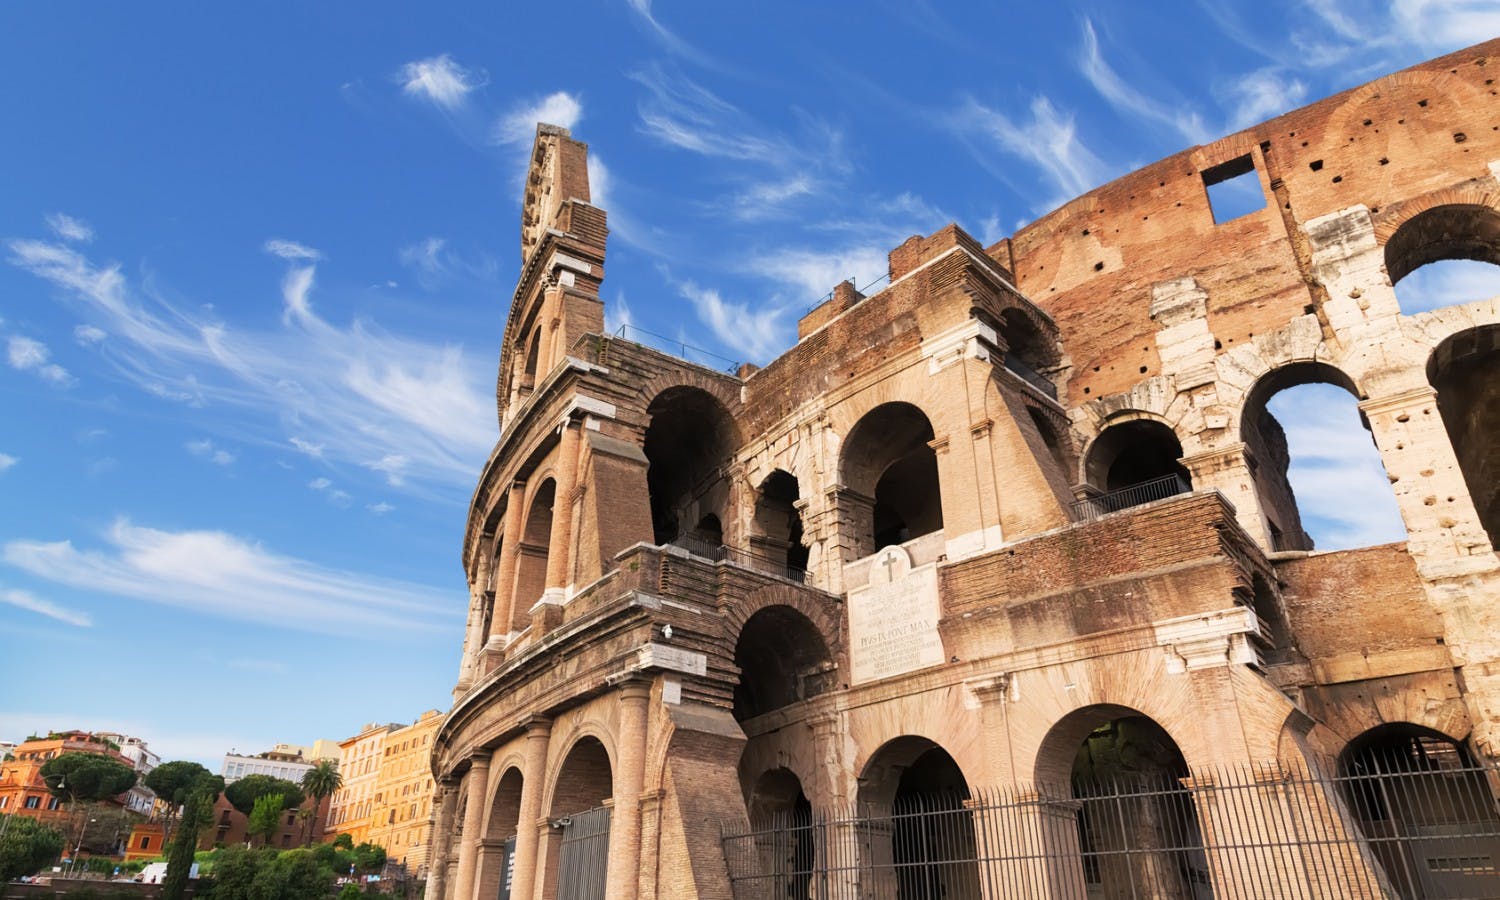 Best of Rome walking tour with Colosseum and ancient sites